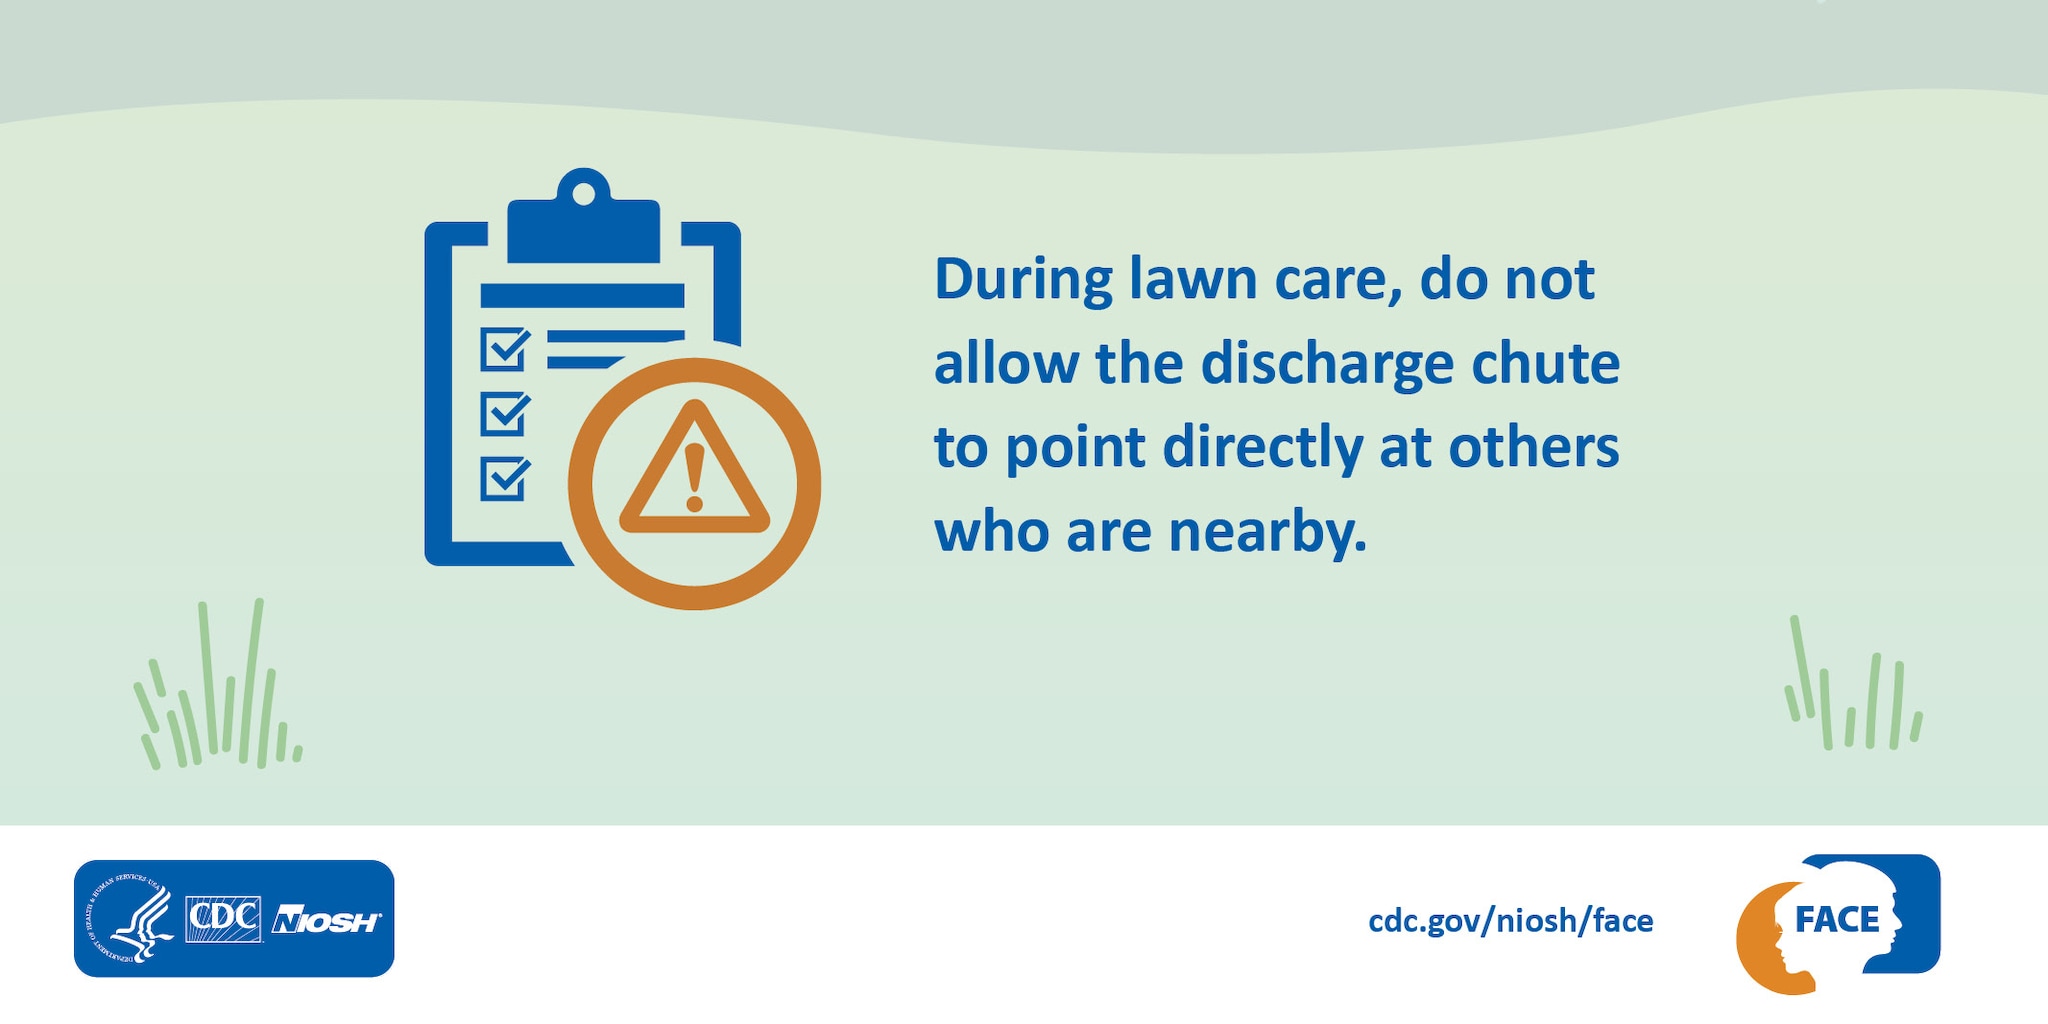 During lawn care, do not allow the discharge chute to point directly at others who are nearby.